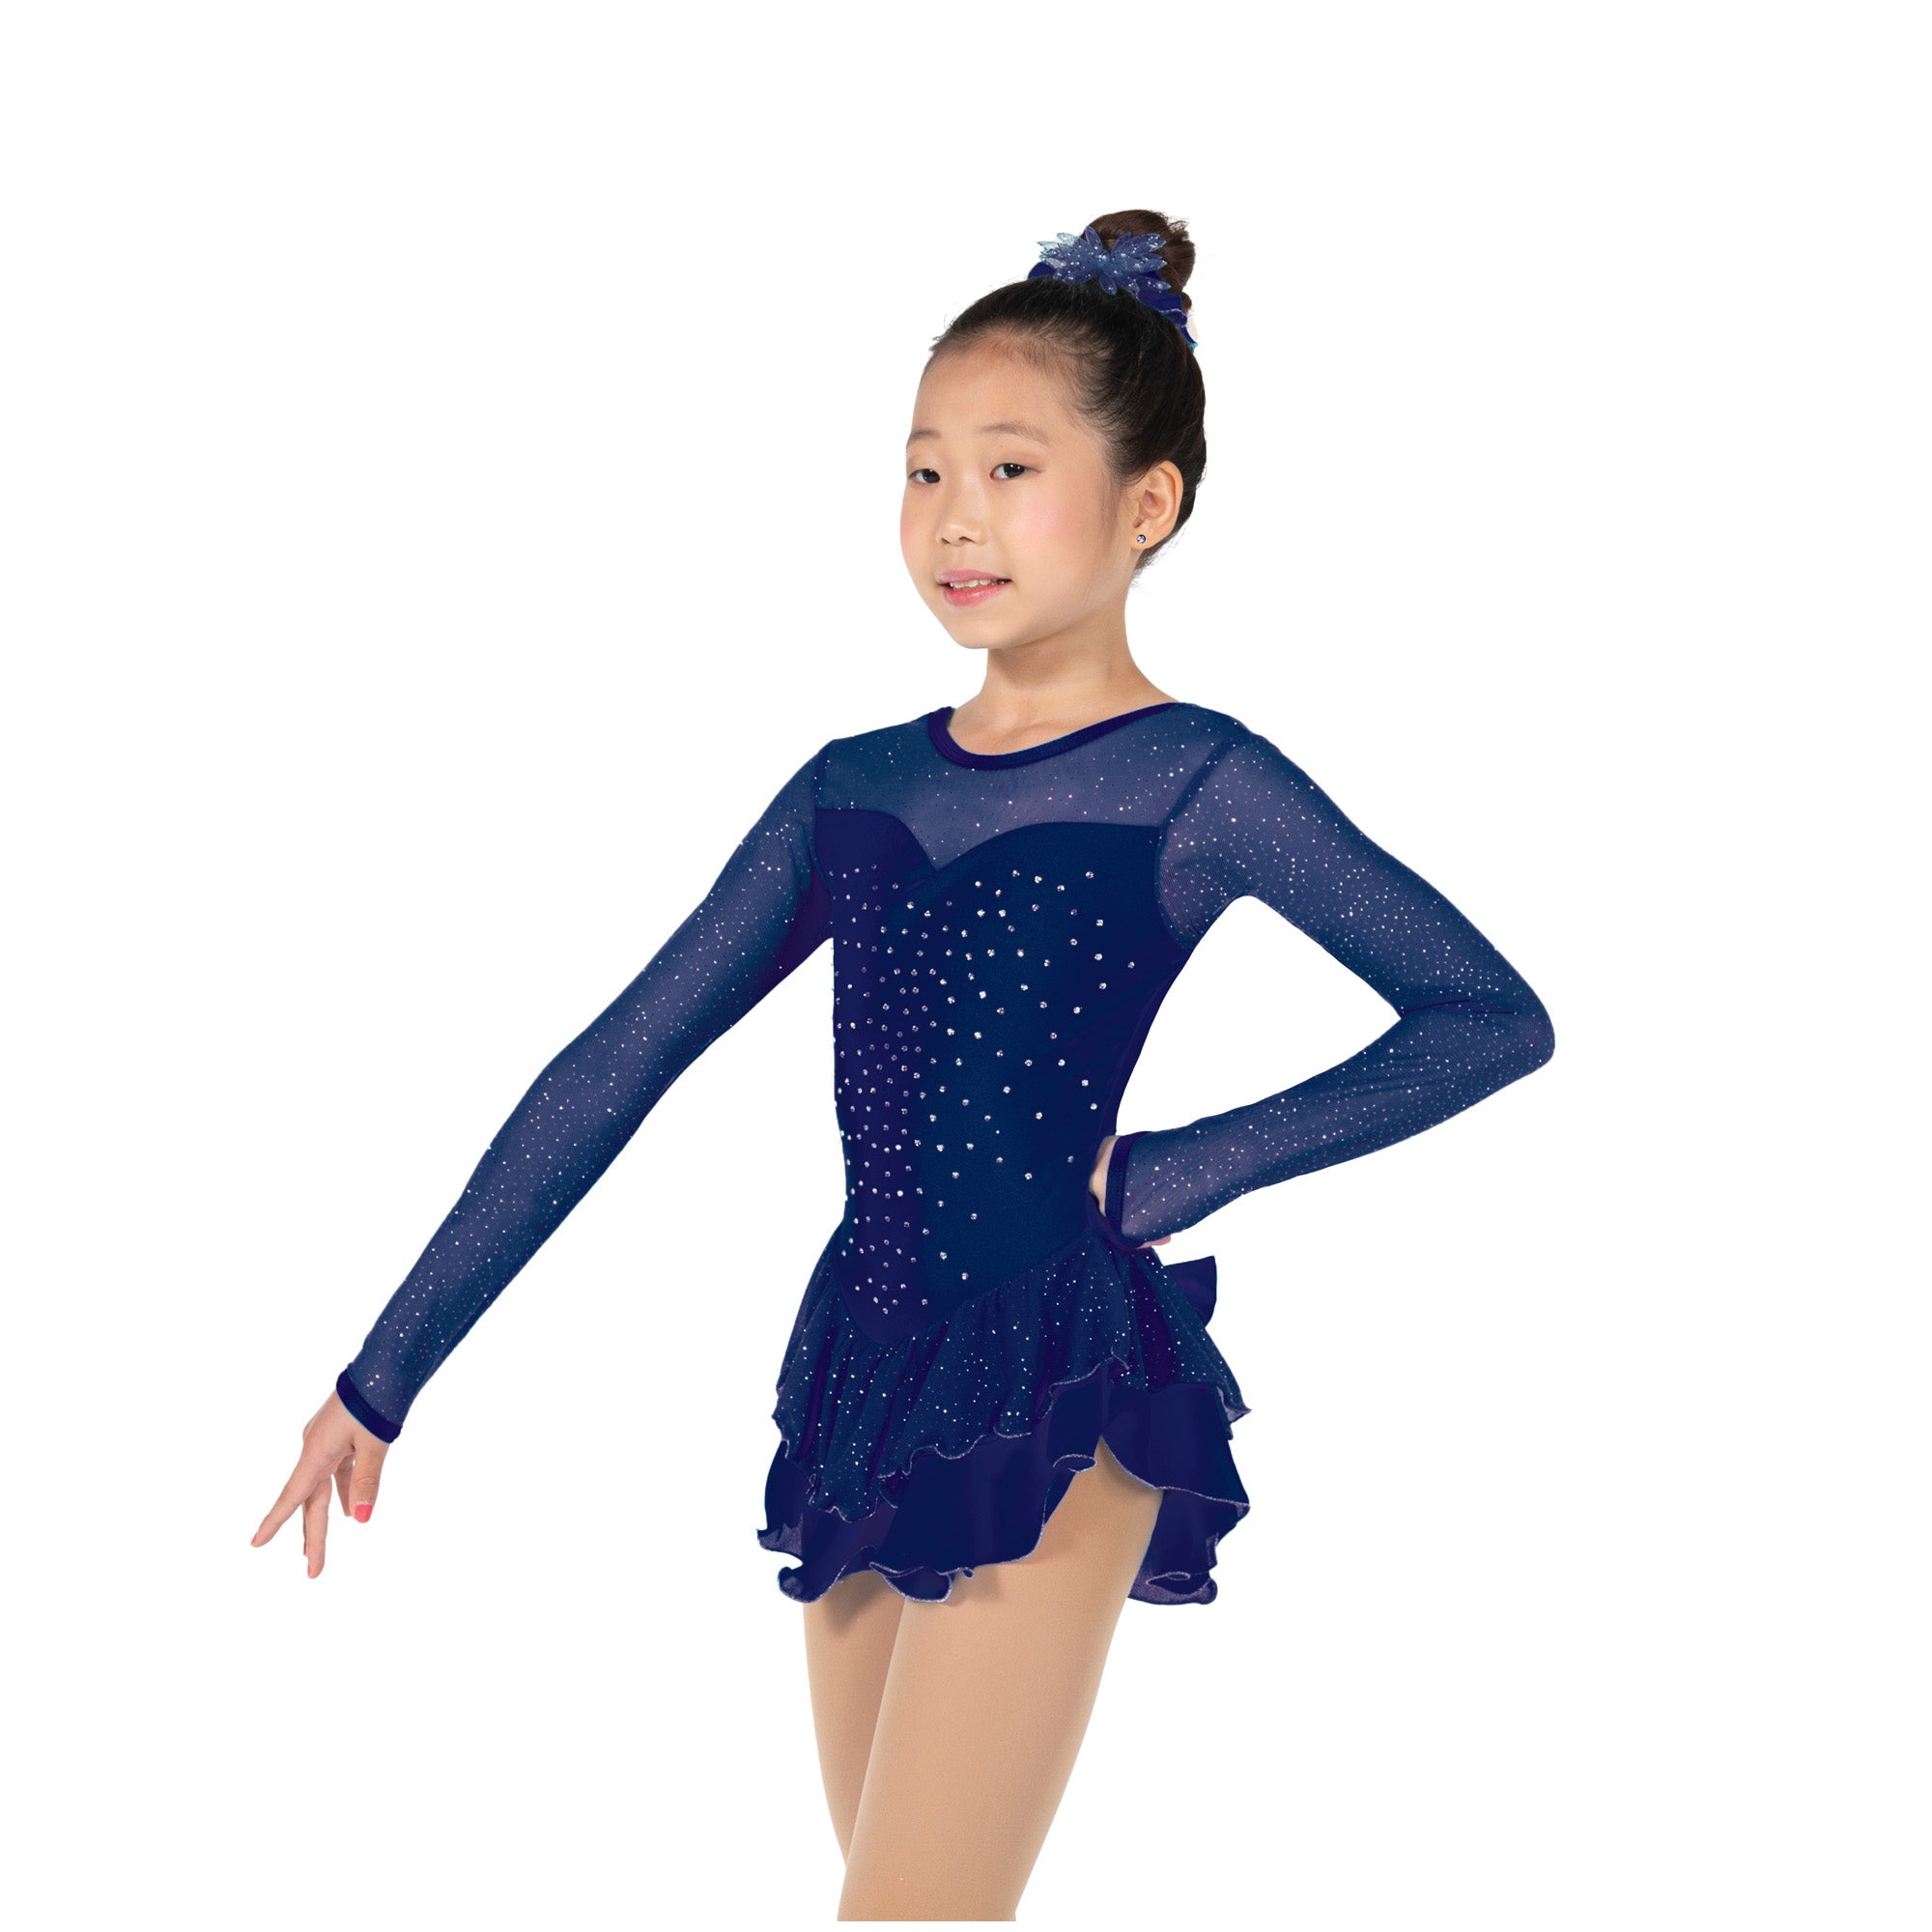 Jerry's 09 Key Lace Dress Youth – Figure Skating Boutique